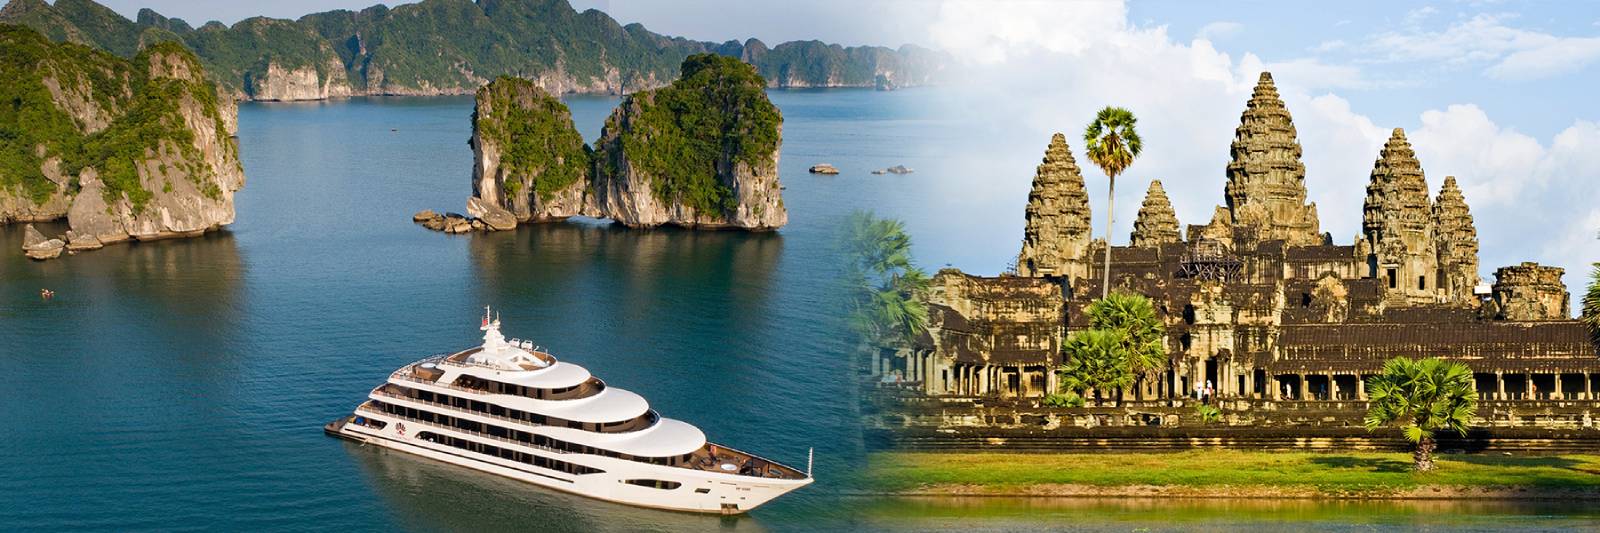 Vietnam Cambodia Tours & Vacation Packages